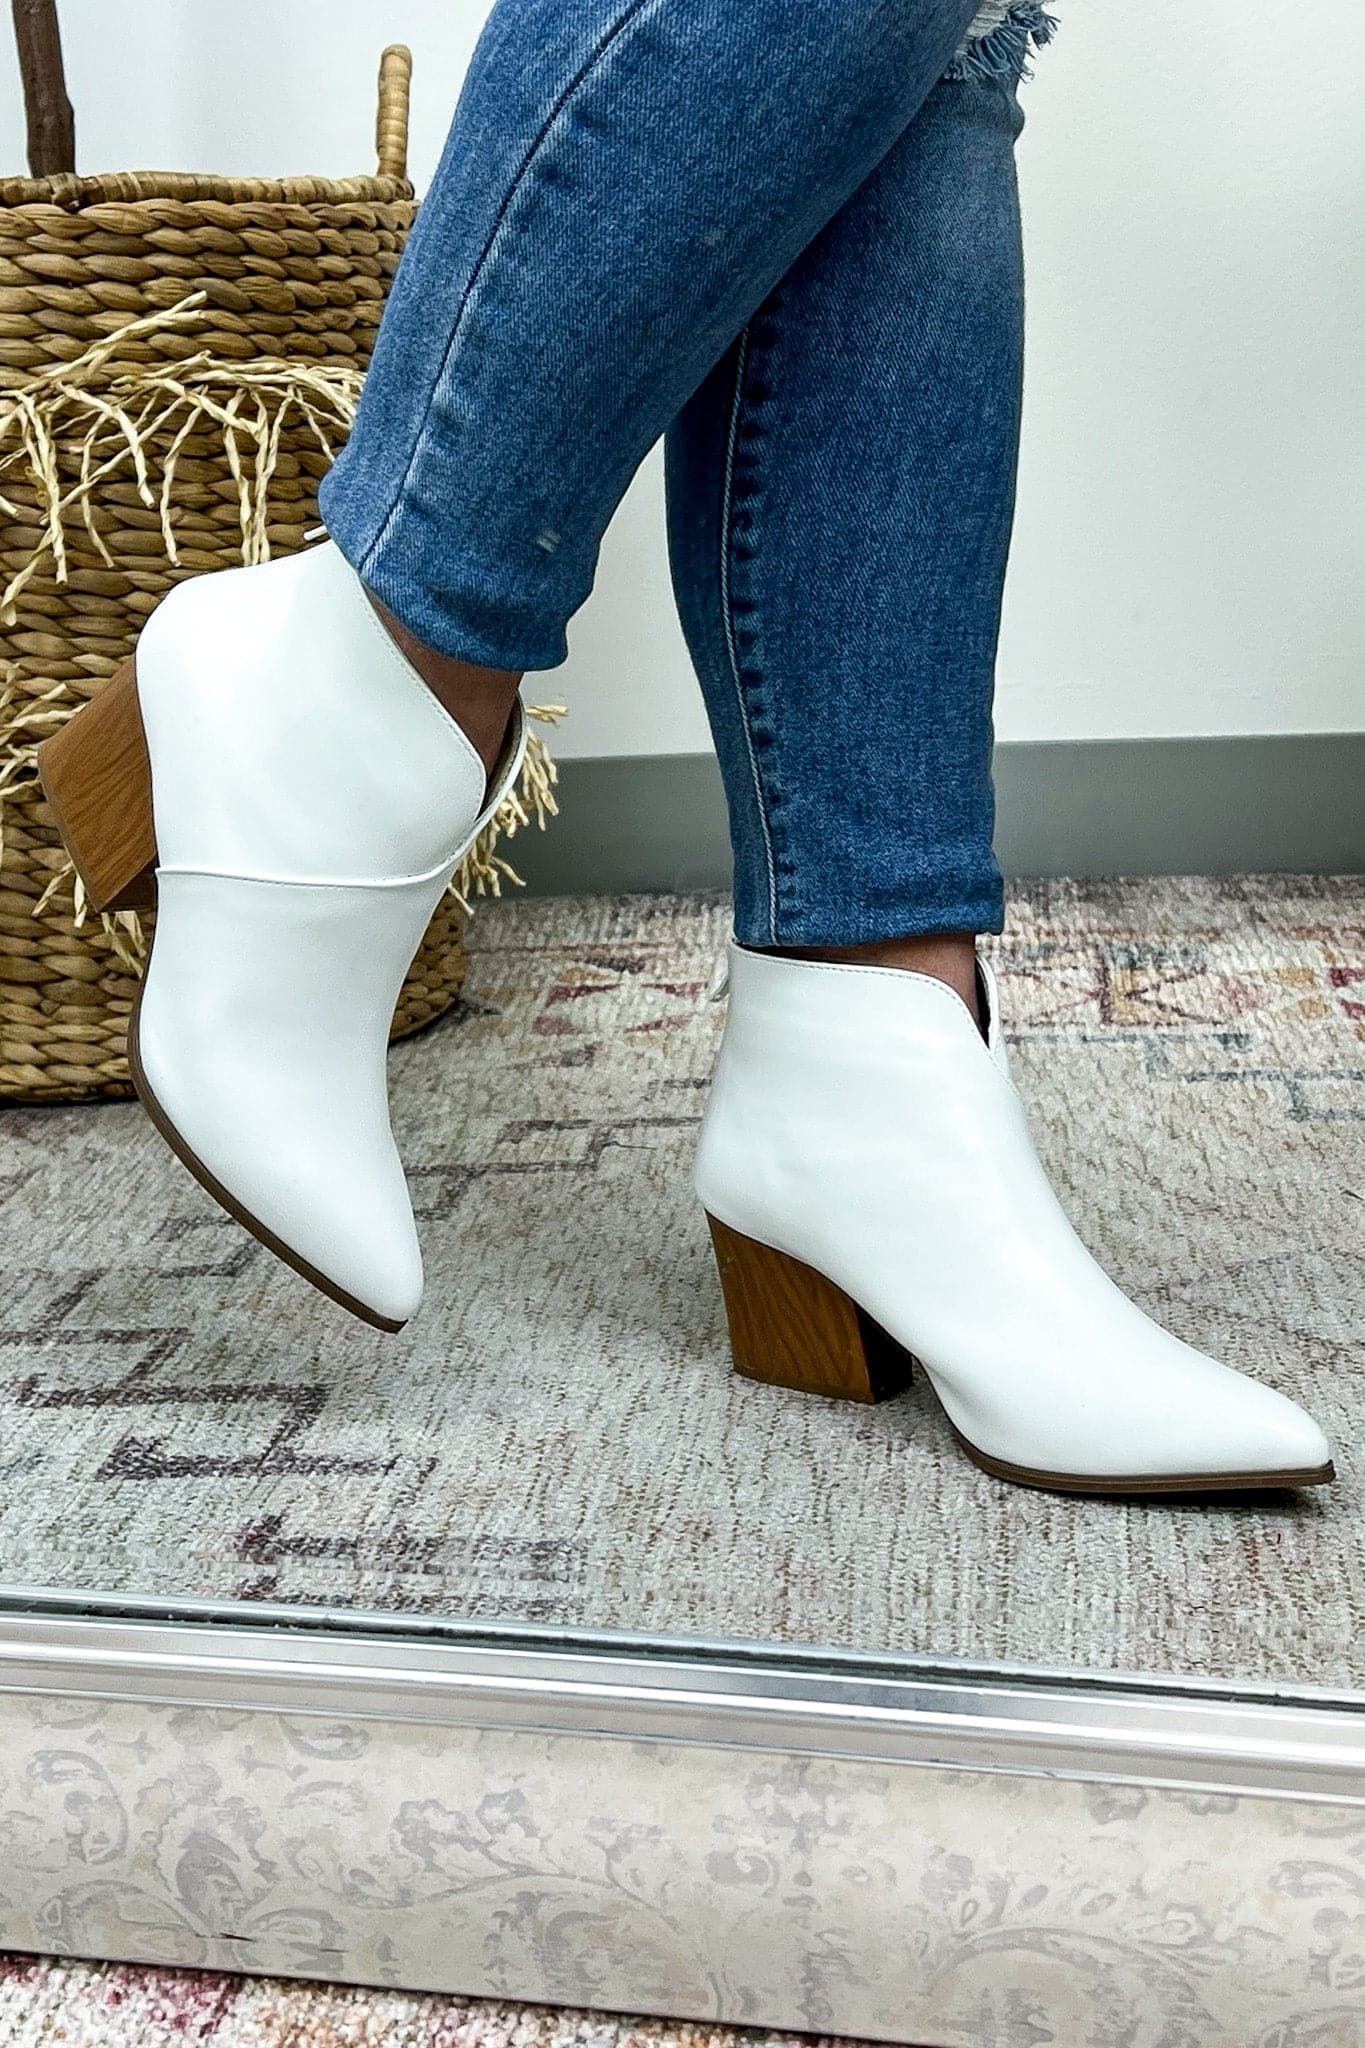  Next in Line Notch Front Faux Leather Booties - BACK IN STOCK - Madison and Mallory